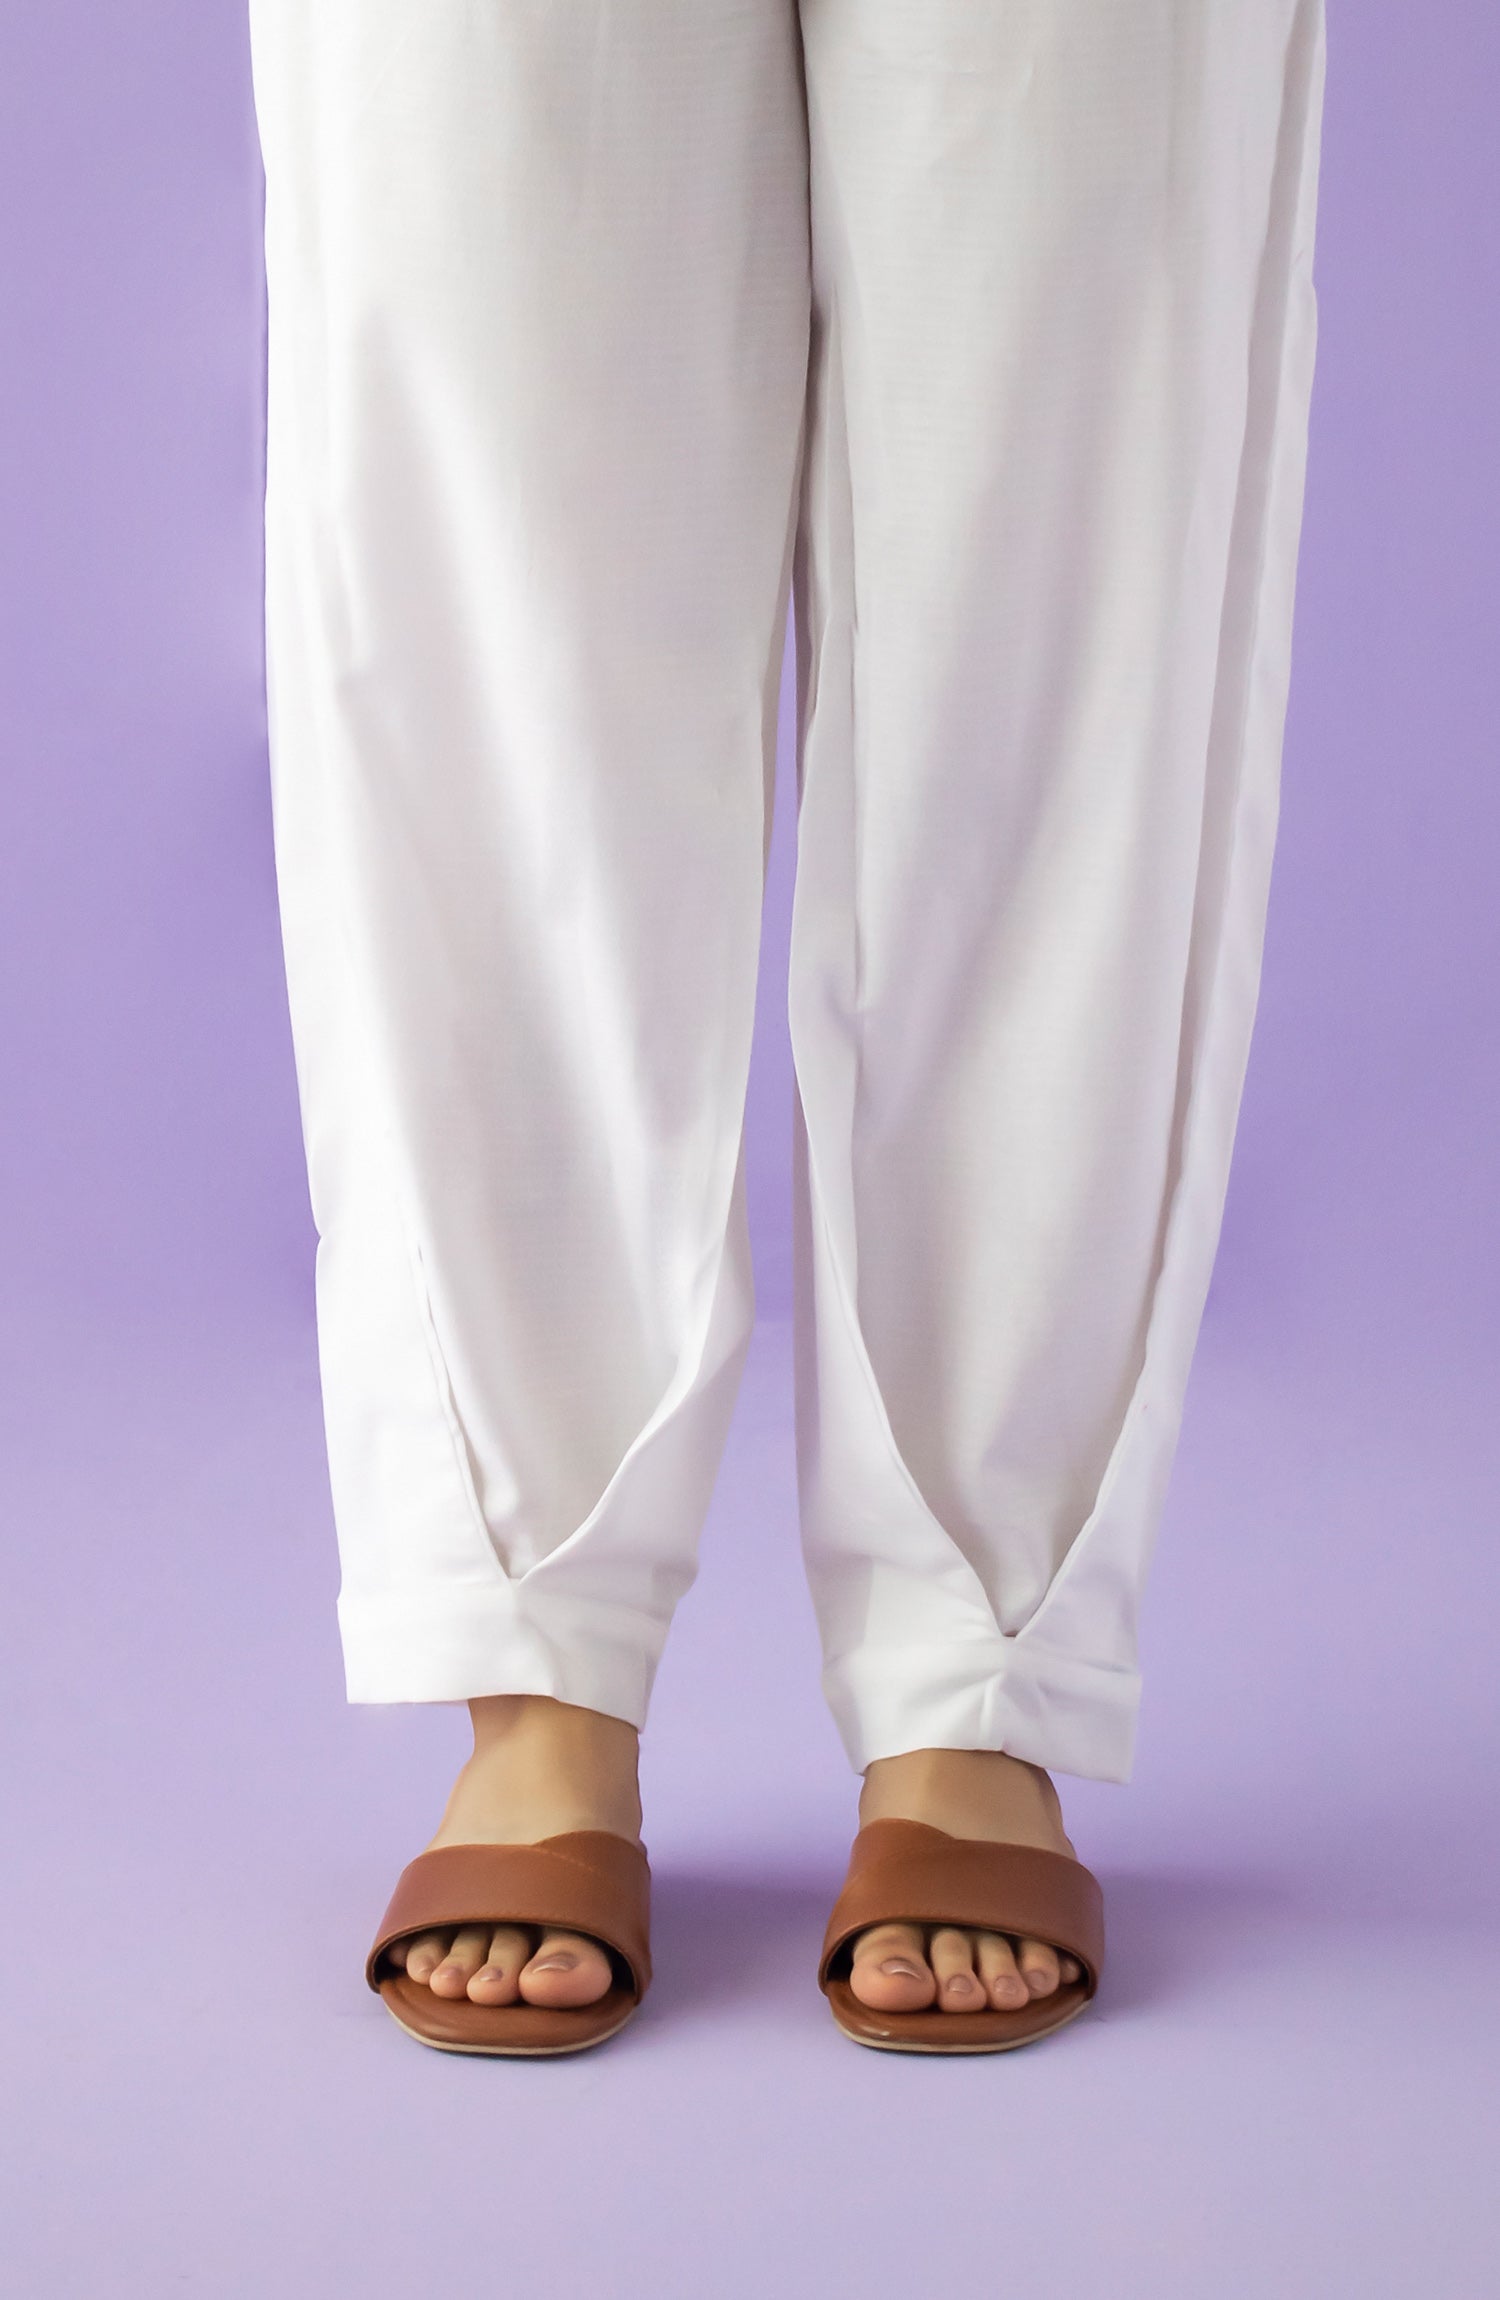 NB-T-PL-23-002 WHITE DOBBY SCTROUSER STITCHED BOTTOMS TROUSER